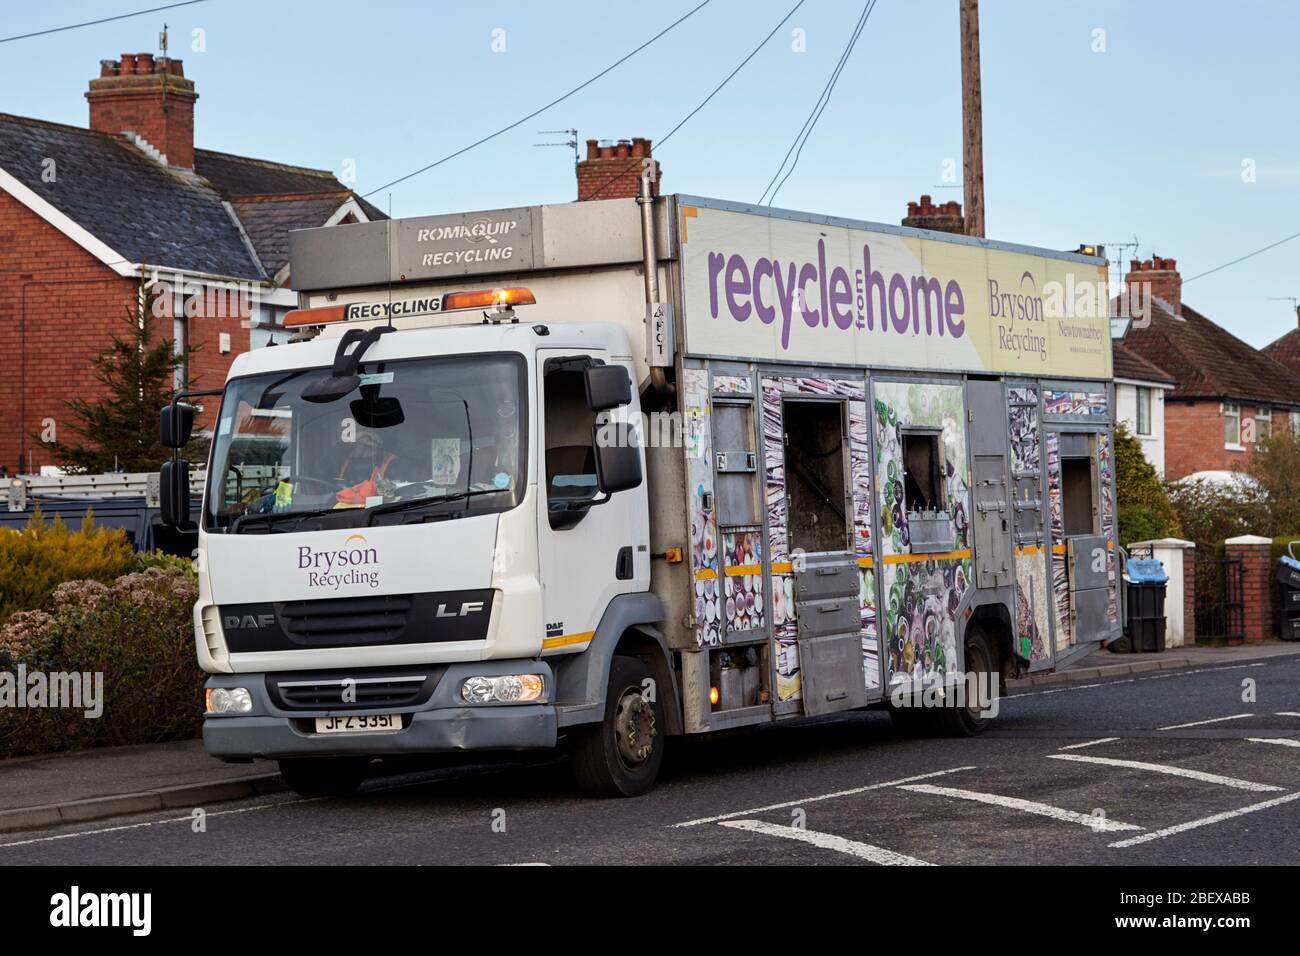 bryson recycling kerbside recycling collection lorry early morning Newtownabbey Northern Ireland UK Stock Photo